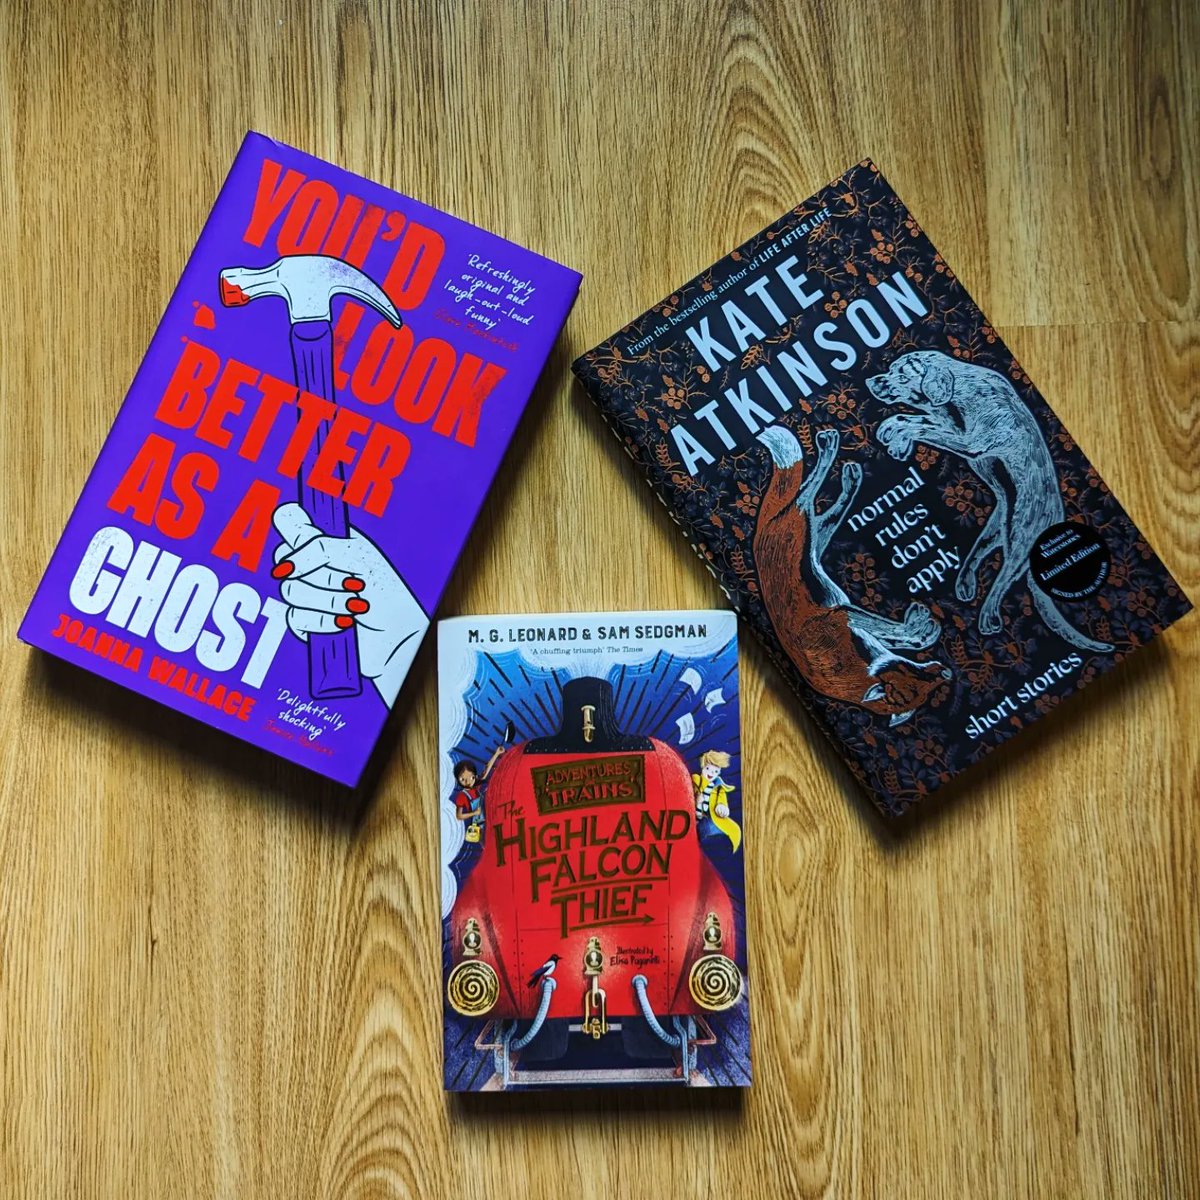 🛍️ 📚 Book Haul 📚🛍️

👻 You'd Look Better as a Ghost by @JoWallaceAuthor 

🦊 Normal Rules Don't Apply by Kate Atkinson

🚃 The Highland Falcon Thief

#ballstothebacklog #bookhaul #BookPost #bookmail #youdlookbetterasaghost #normalrulesdontapply #thehighlandfalconthief